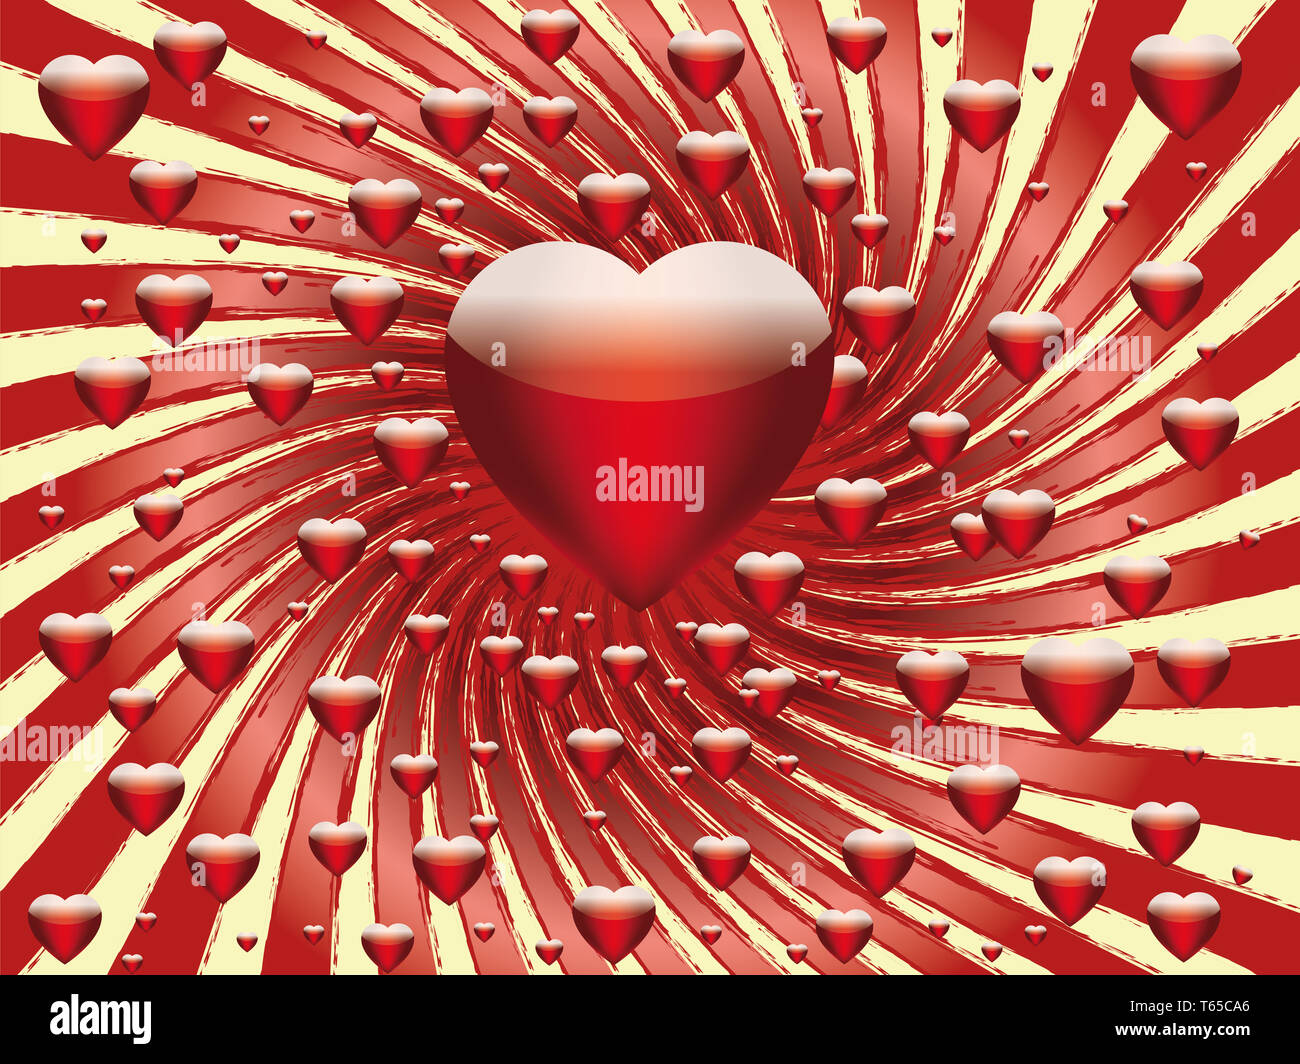 Happy valentines day hearts love ou Banque D'Images